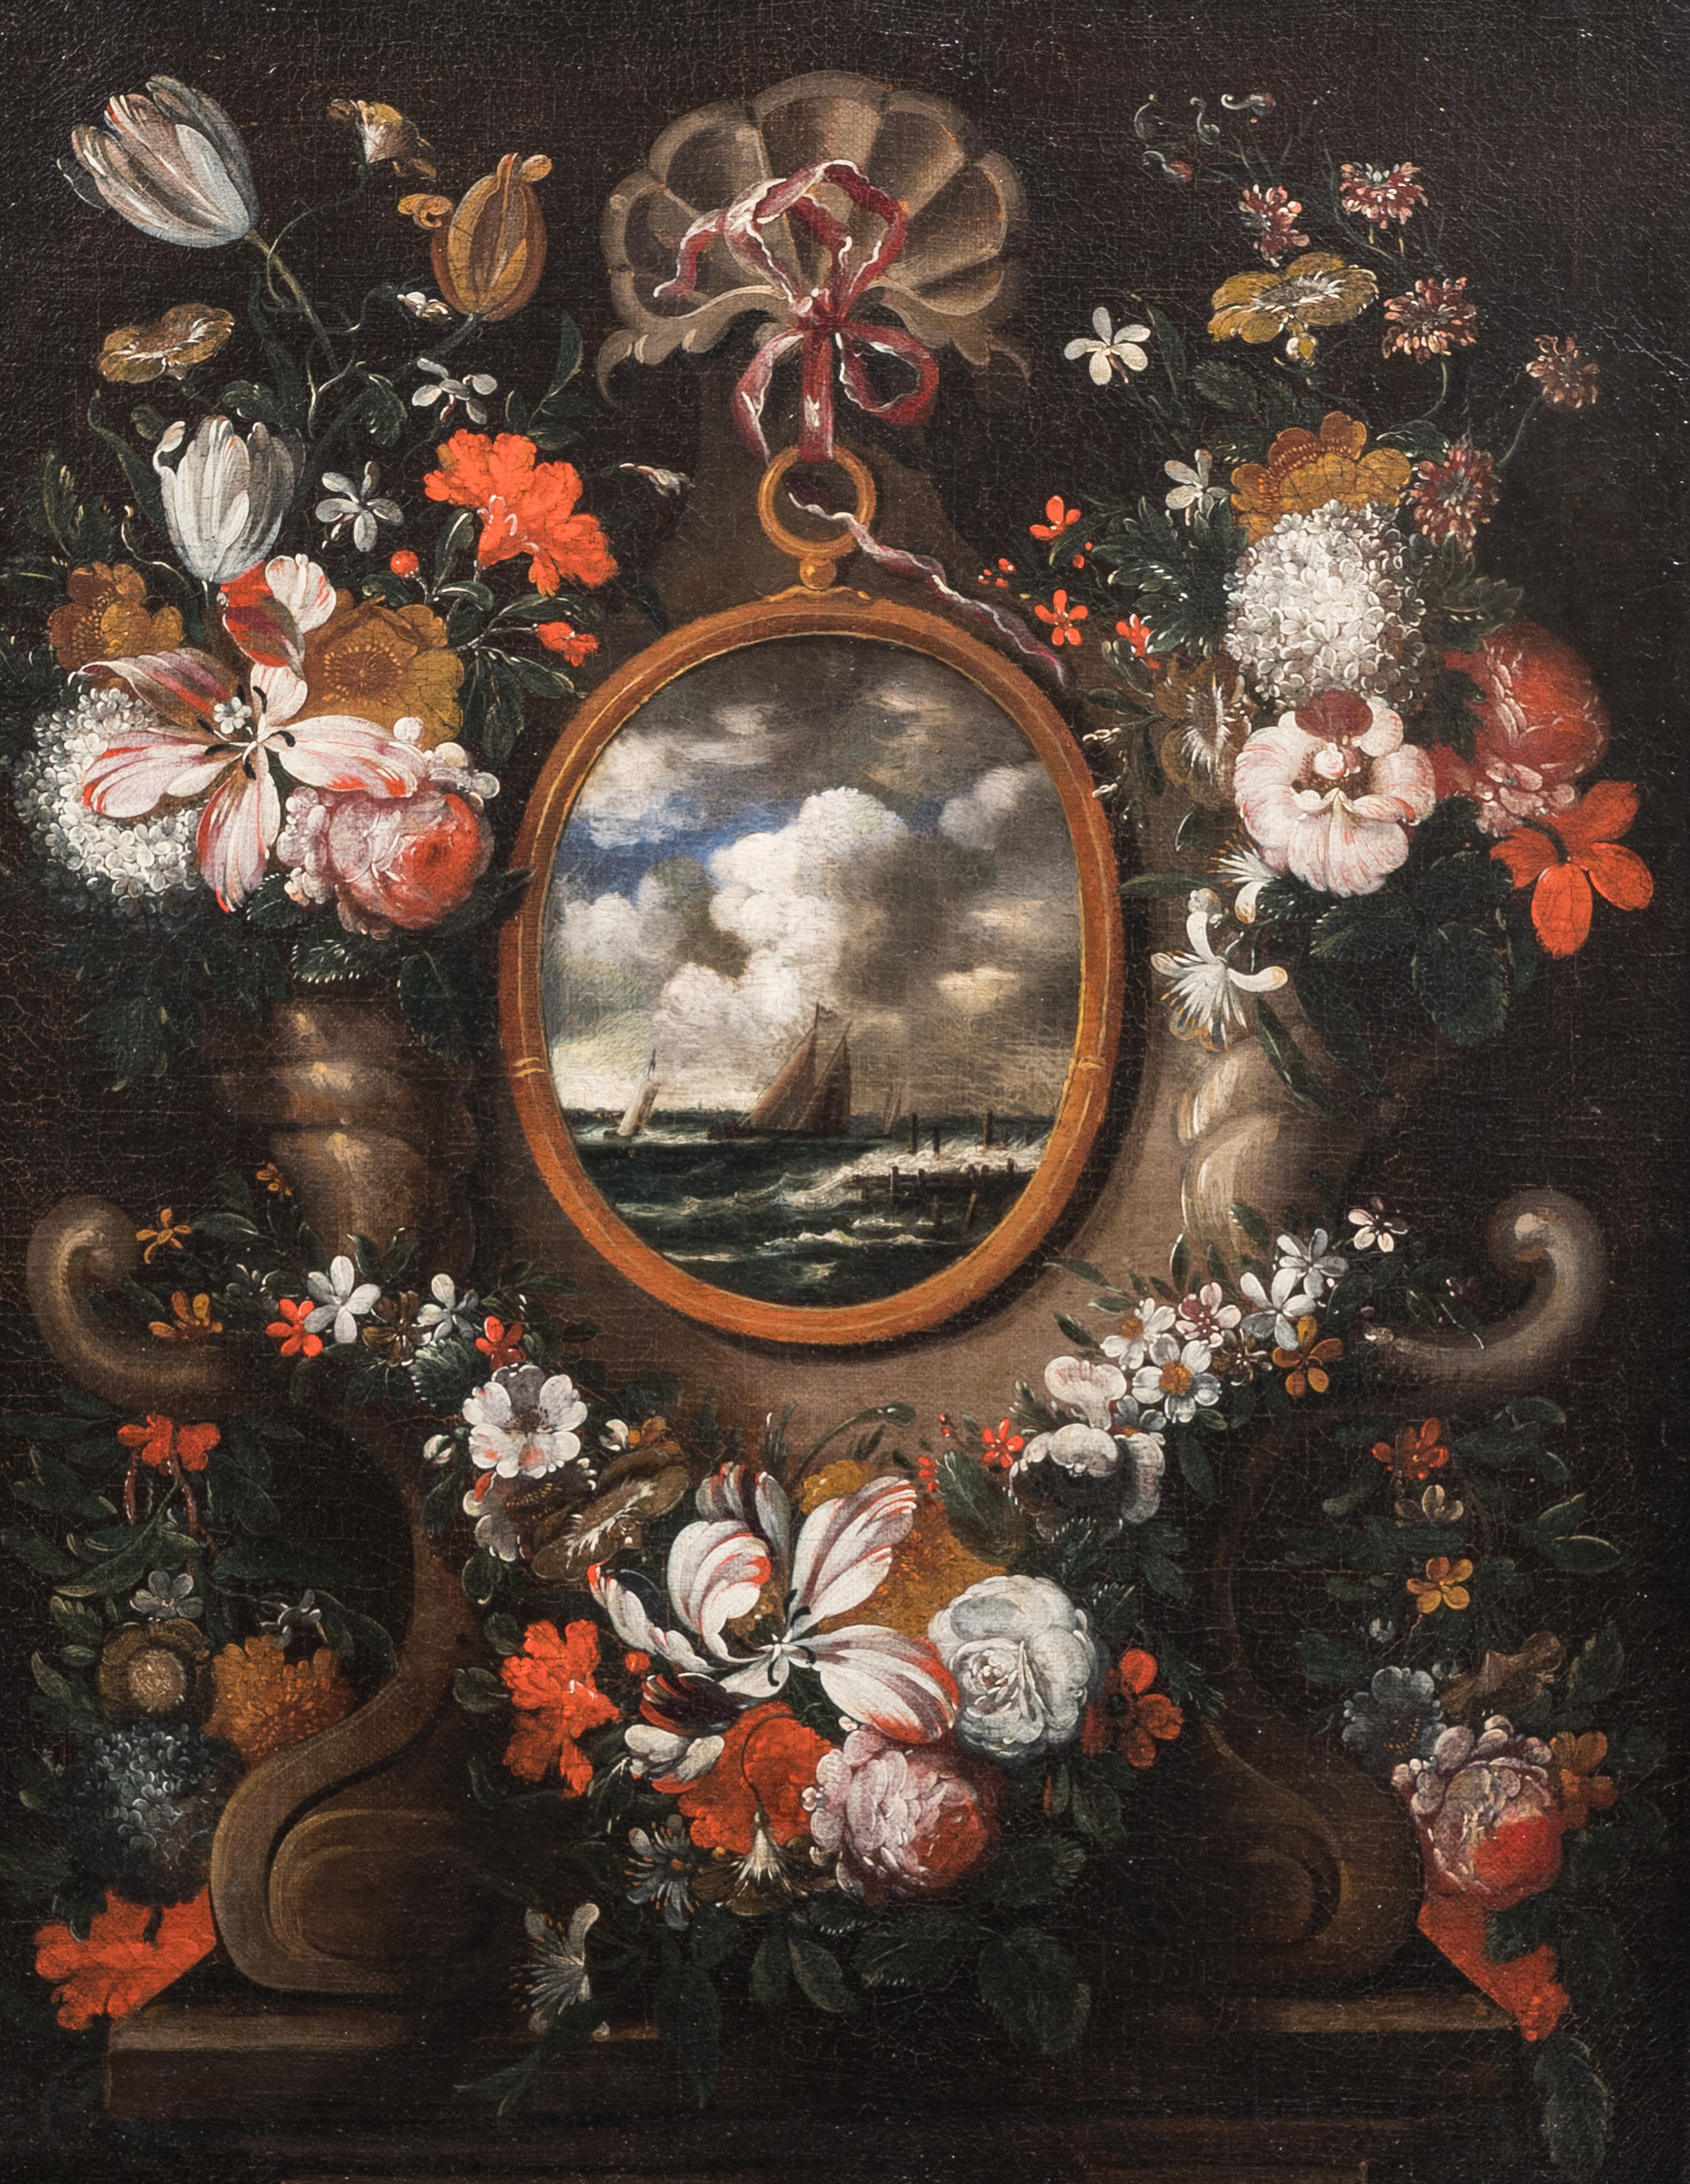 German school: Medallion with a marine surrounded by a garland of flowers, oil on canvas, ca. 1700